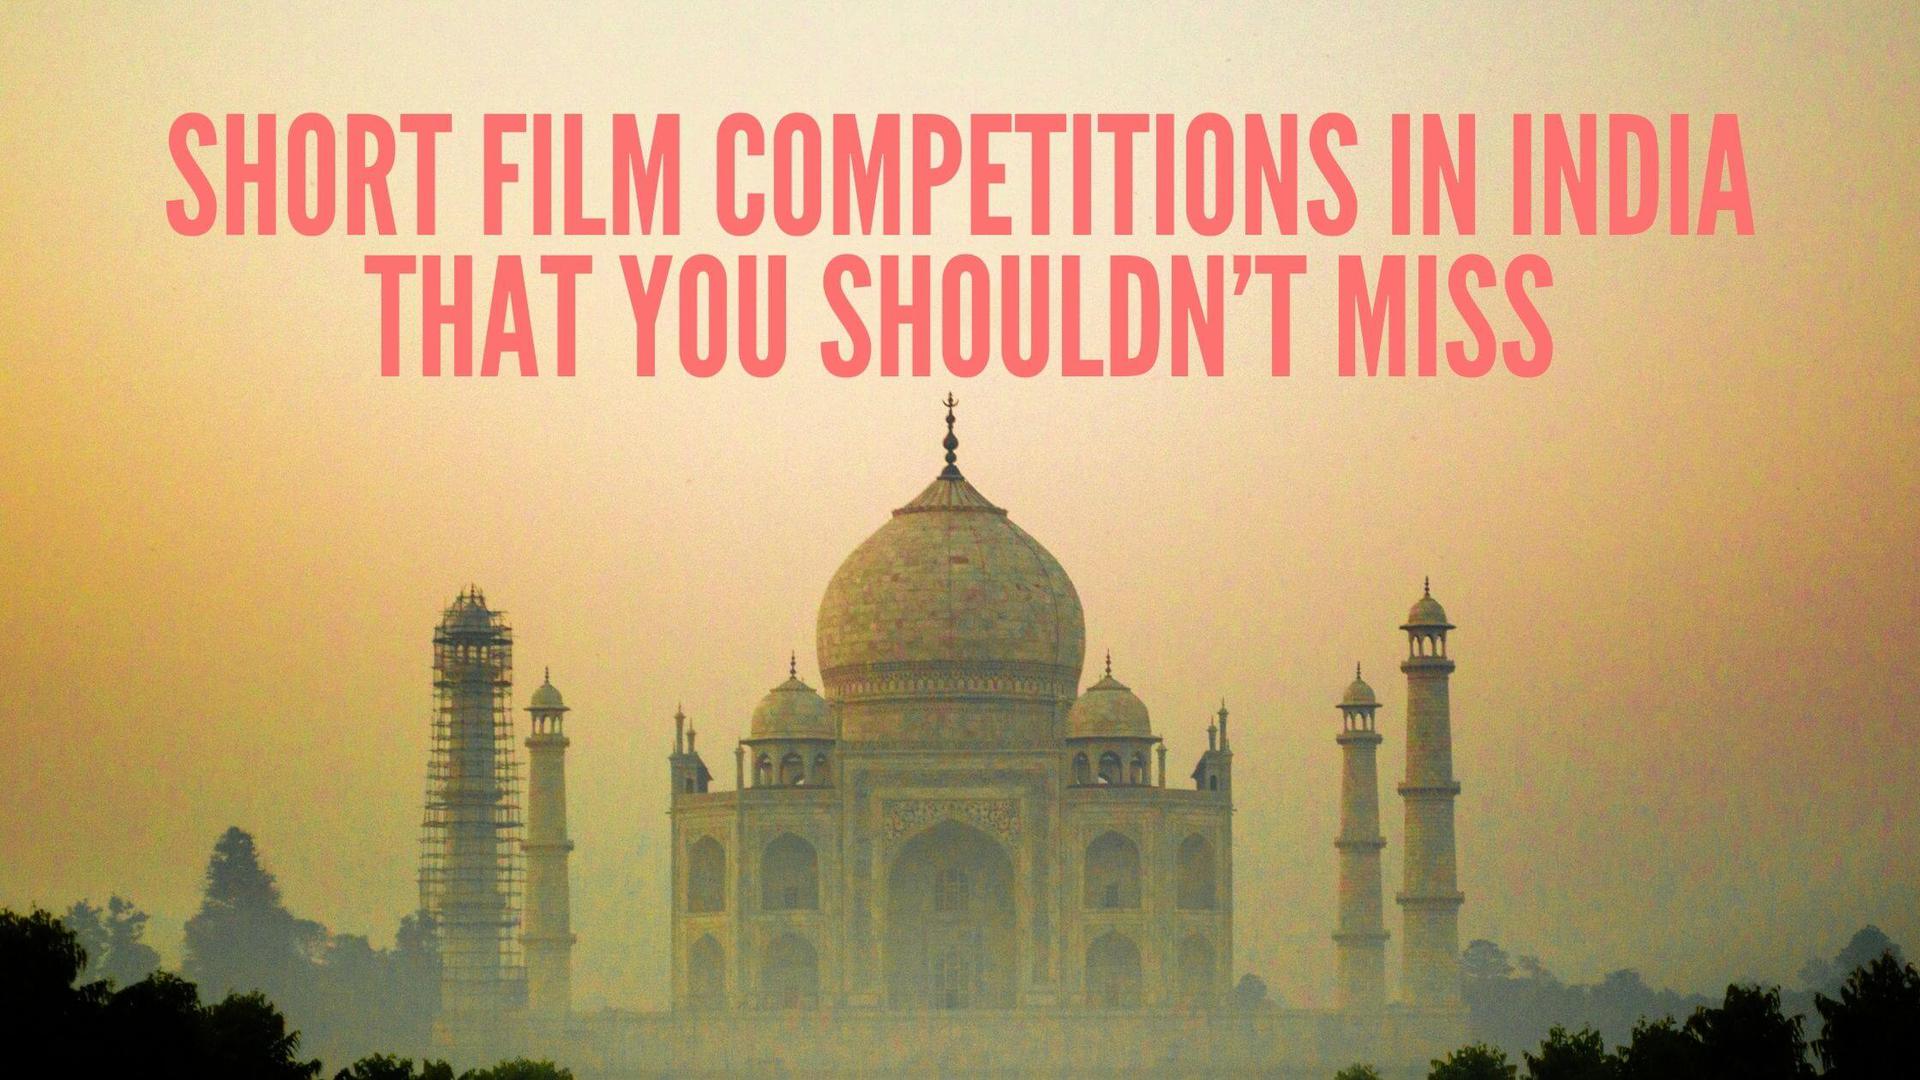 Short Film Competitions in India That You Shouldn’t Miss - Indie Shorts Mag